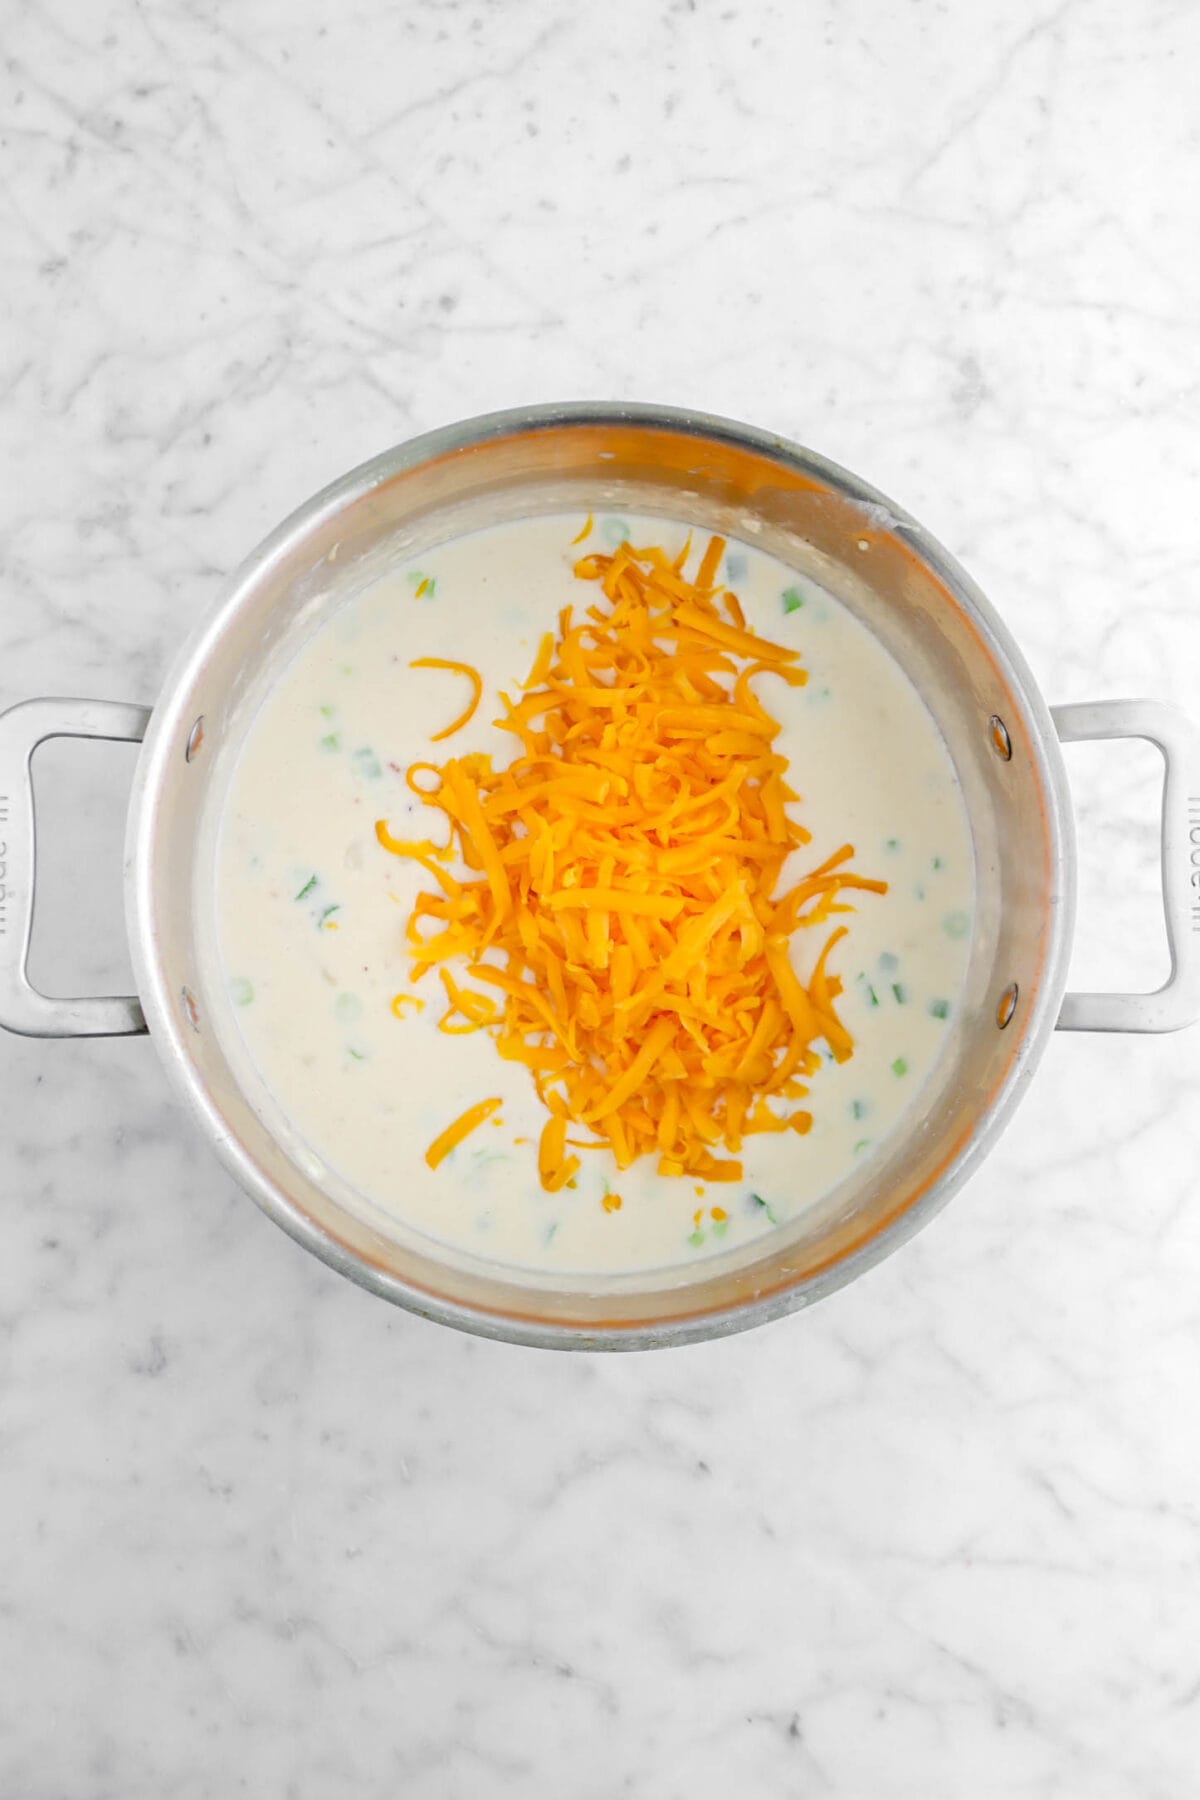 grated cheddar cheese added to soup